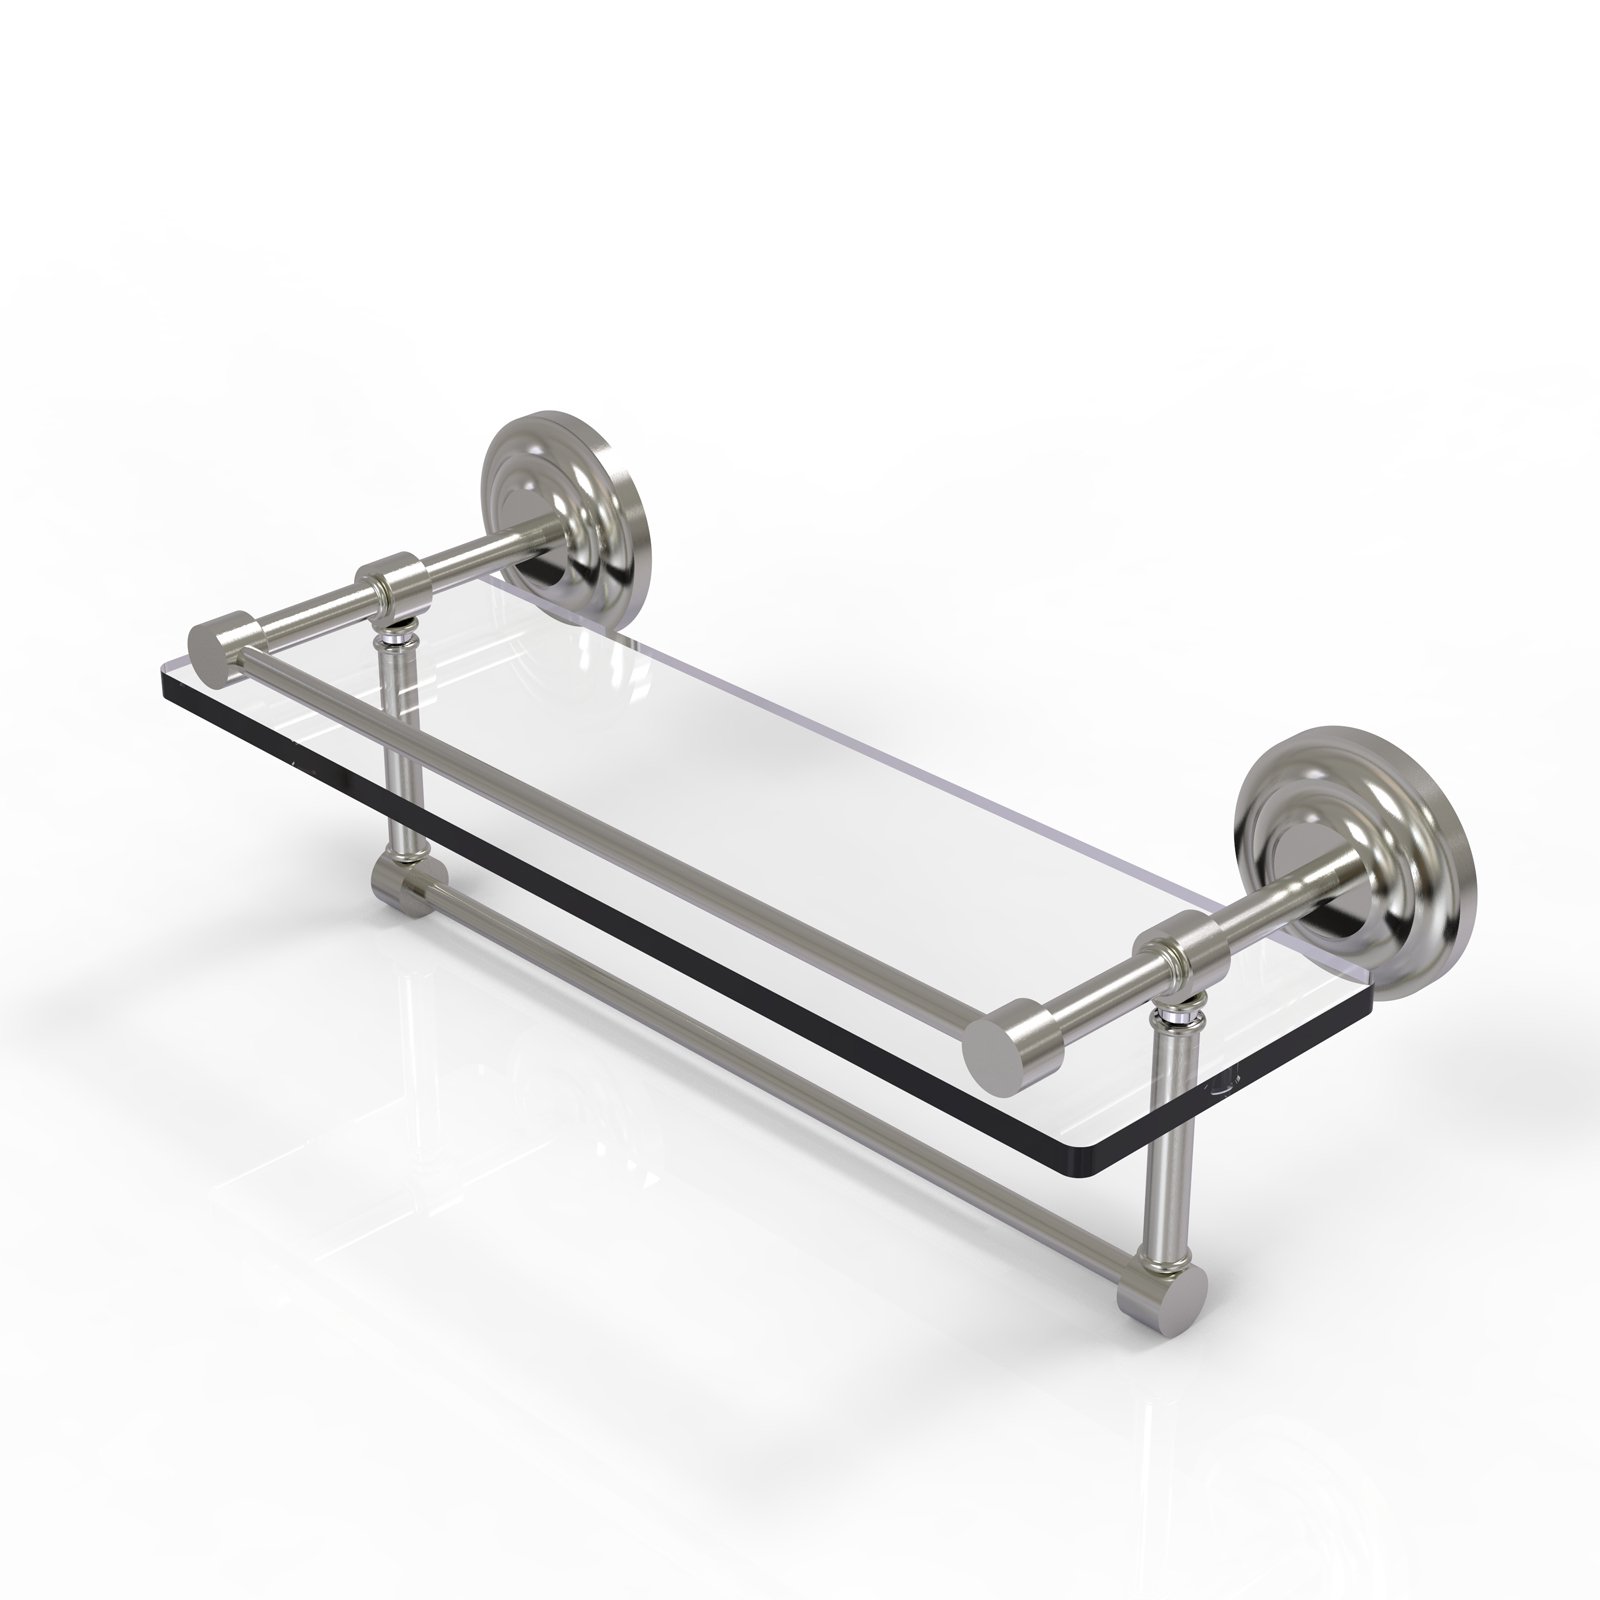 22-in Gallery Glass Shelf with Towel Bar in Antique Bronze - image 2 of 2